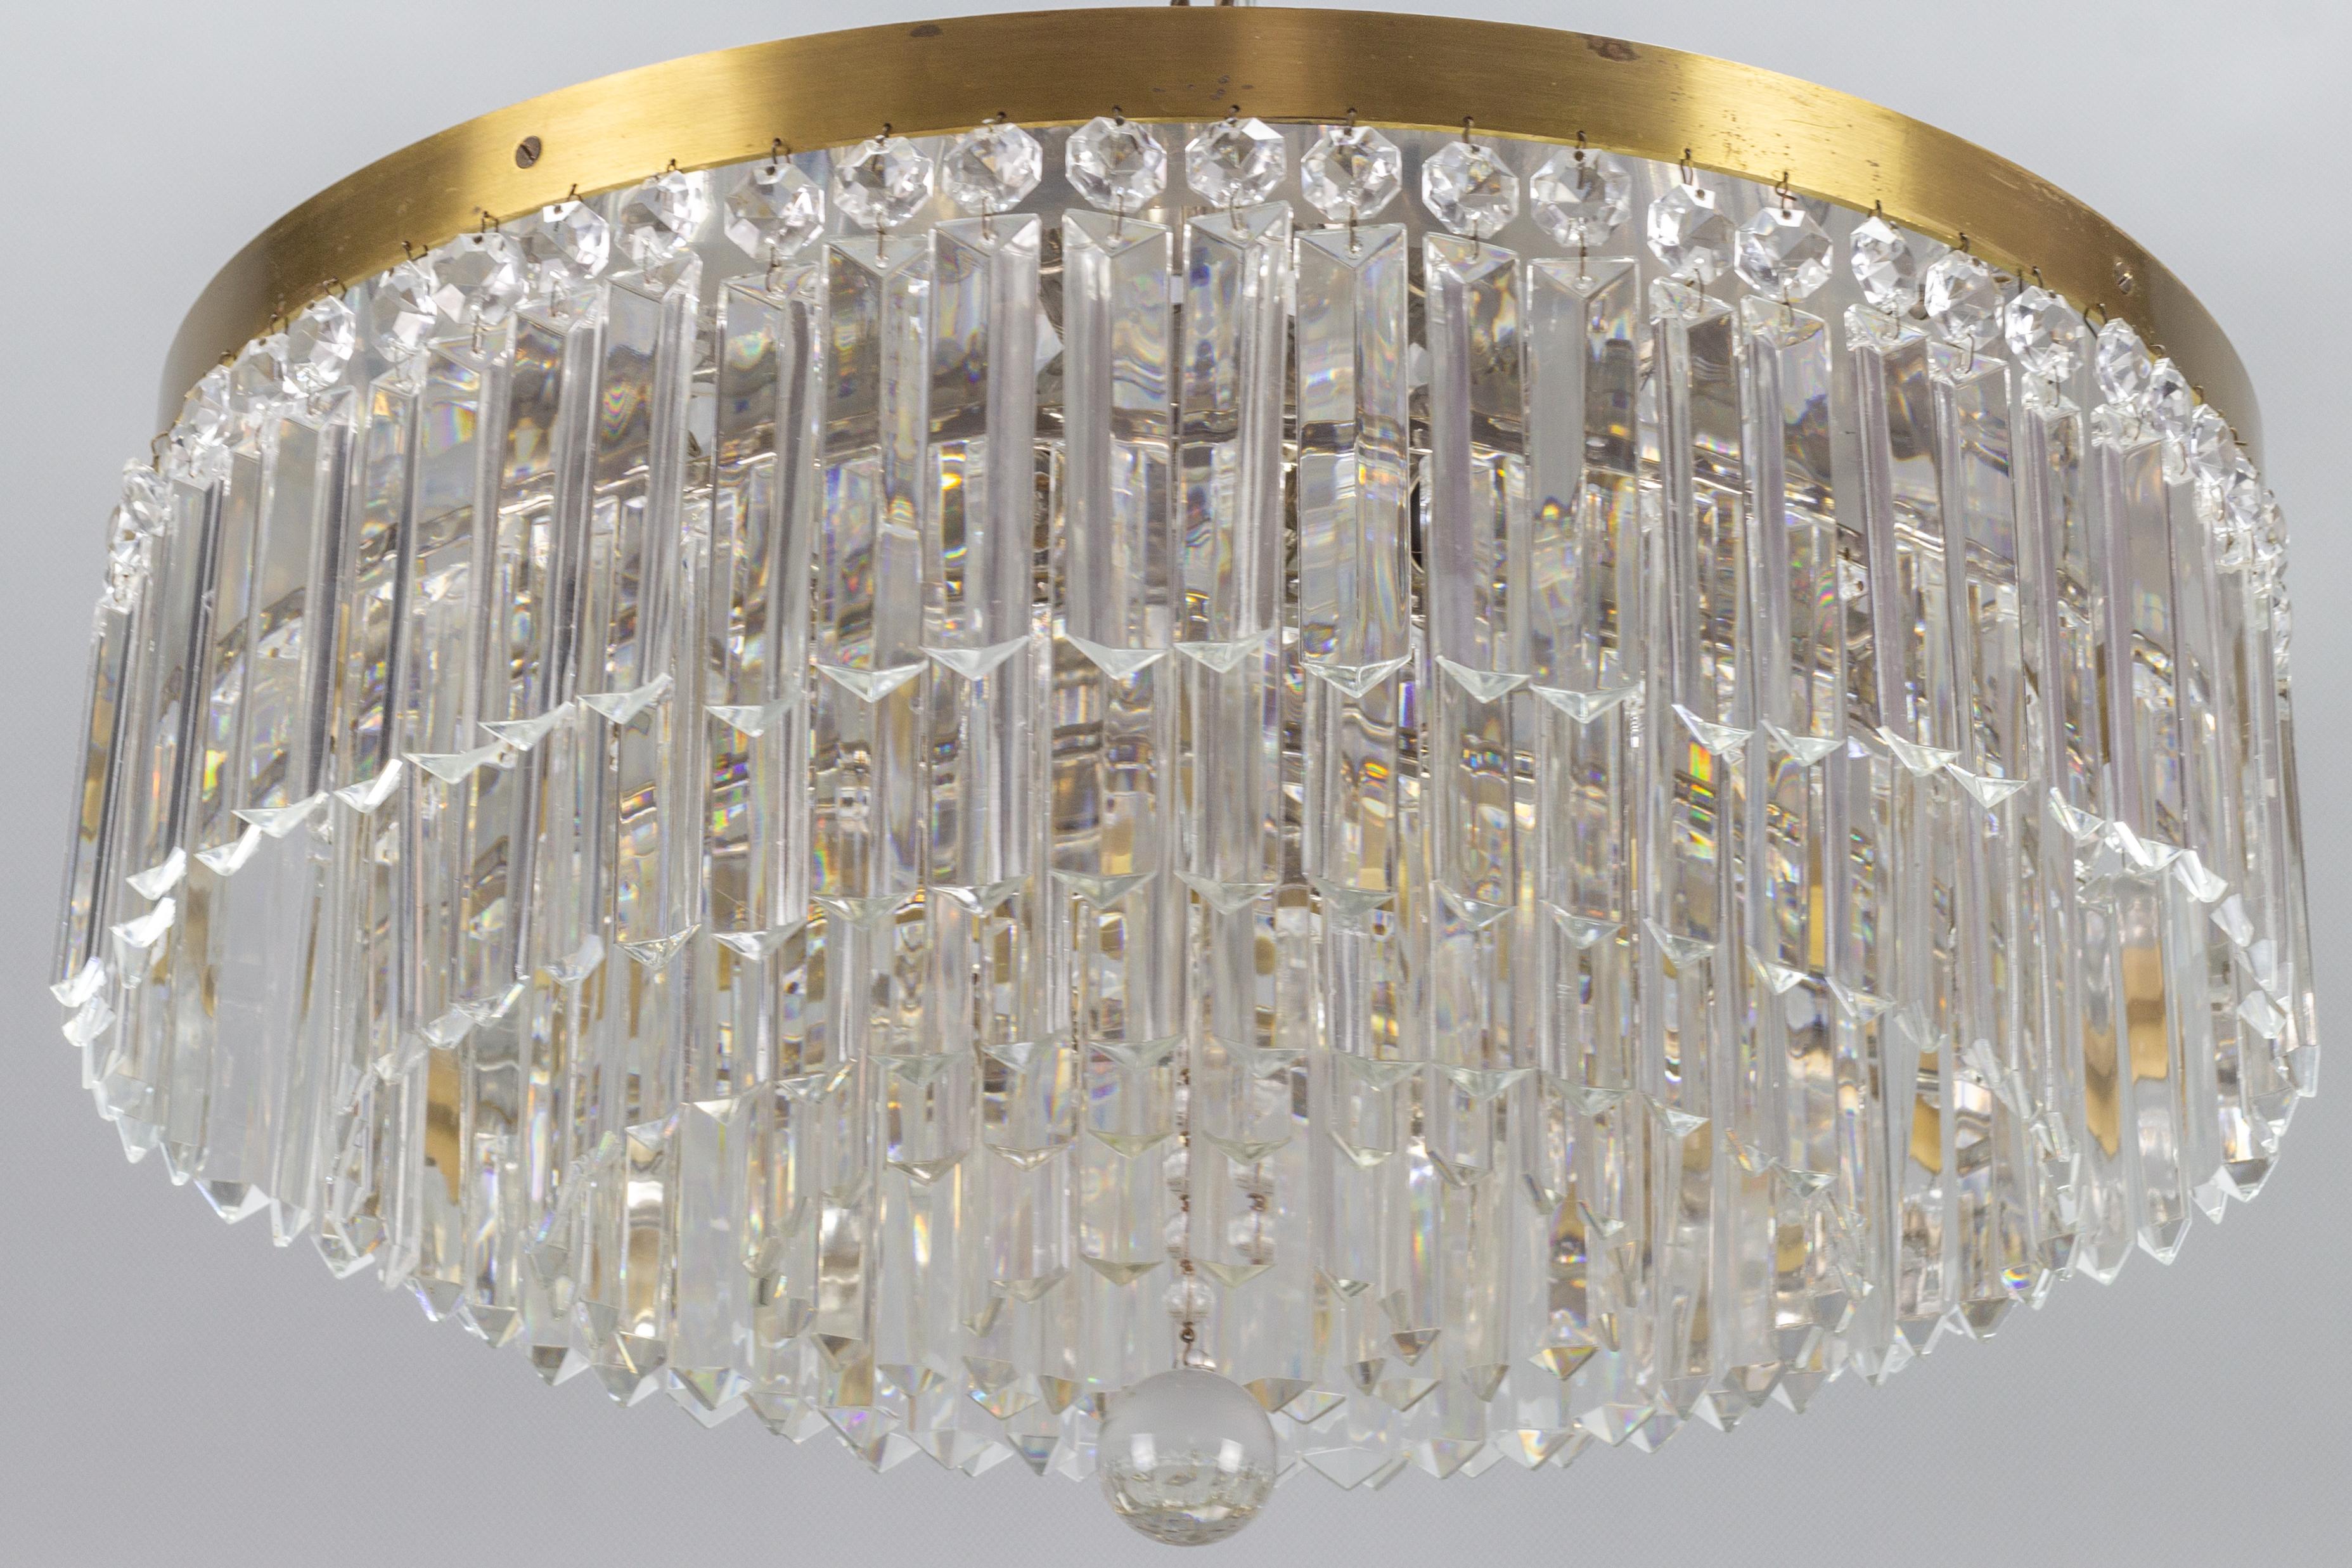 This impressive Art Deco style flush mount ceiling fixture in a classic wedding cake or waterfall form features five tiers of crystal prisms, terminating in a spherical glass ball in the center. The mounting base features a brass edge and a